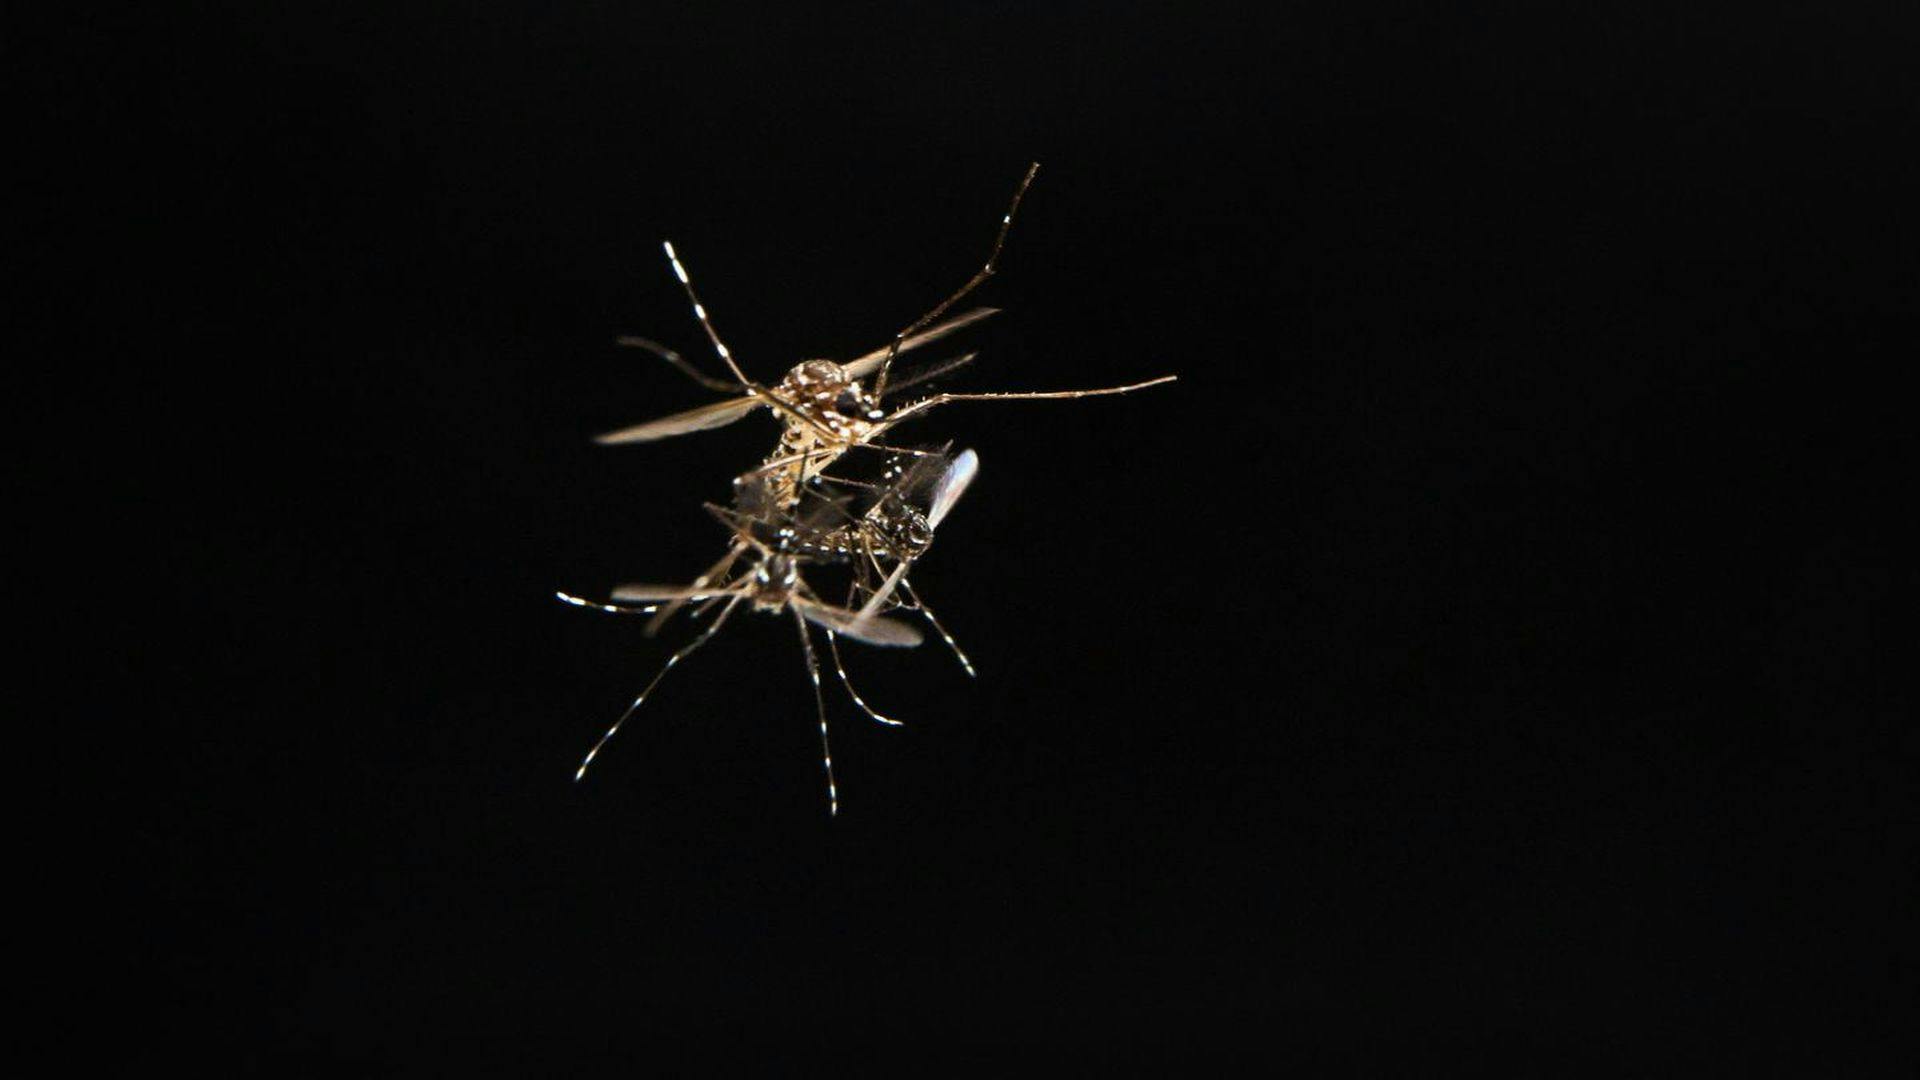 Mosquito Sex Protein Could Provide Key to Controlling Disease